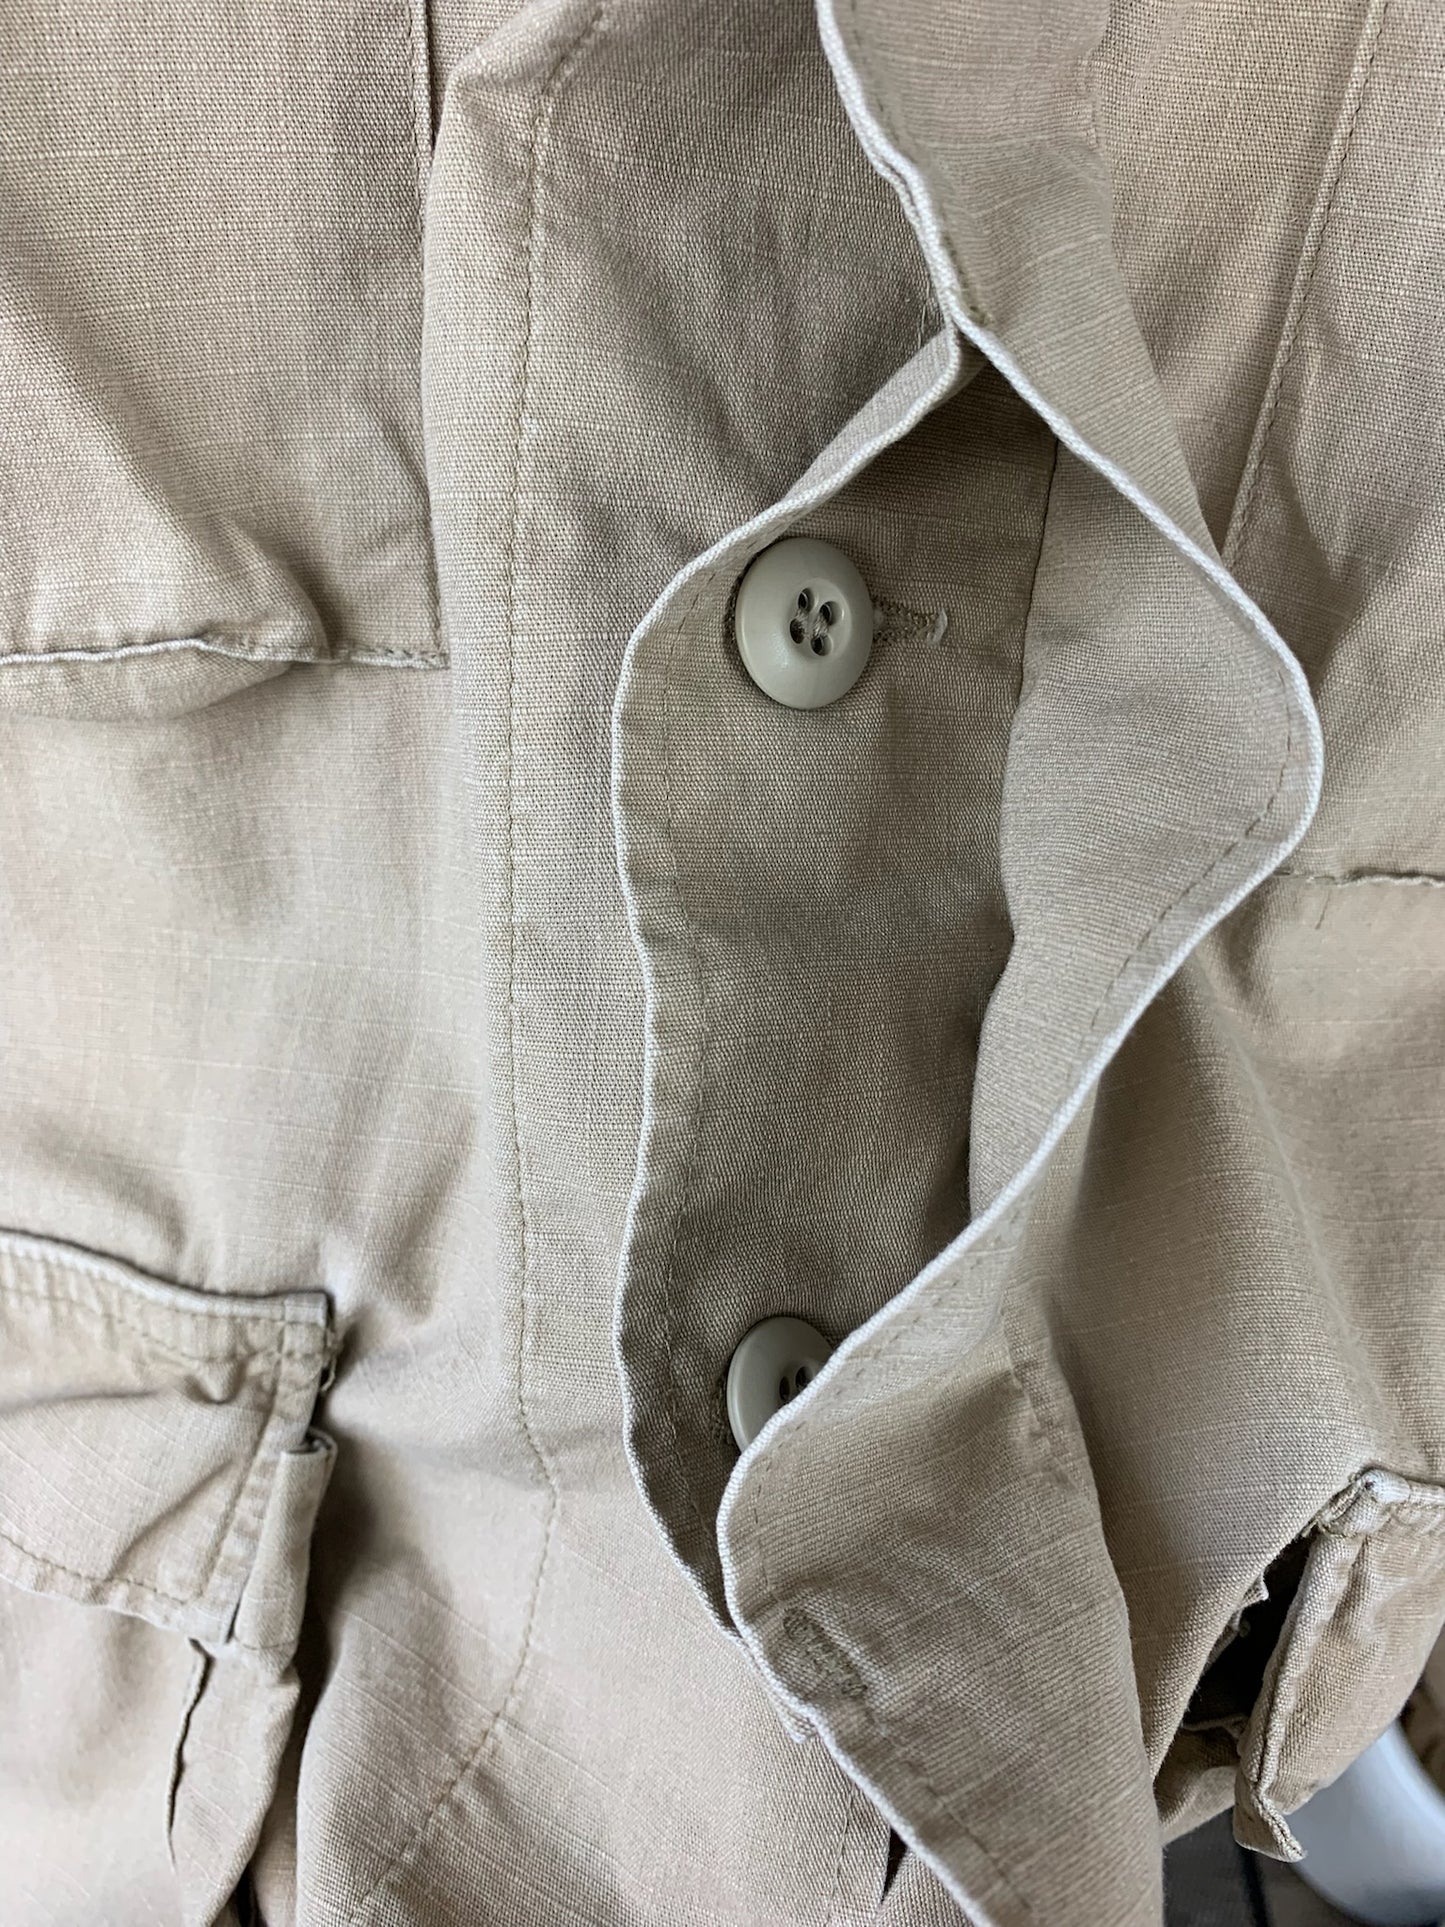 Tan Utility Jacket By Standard Issue